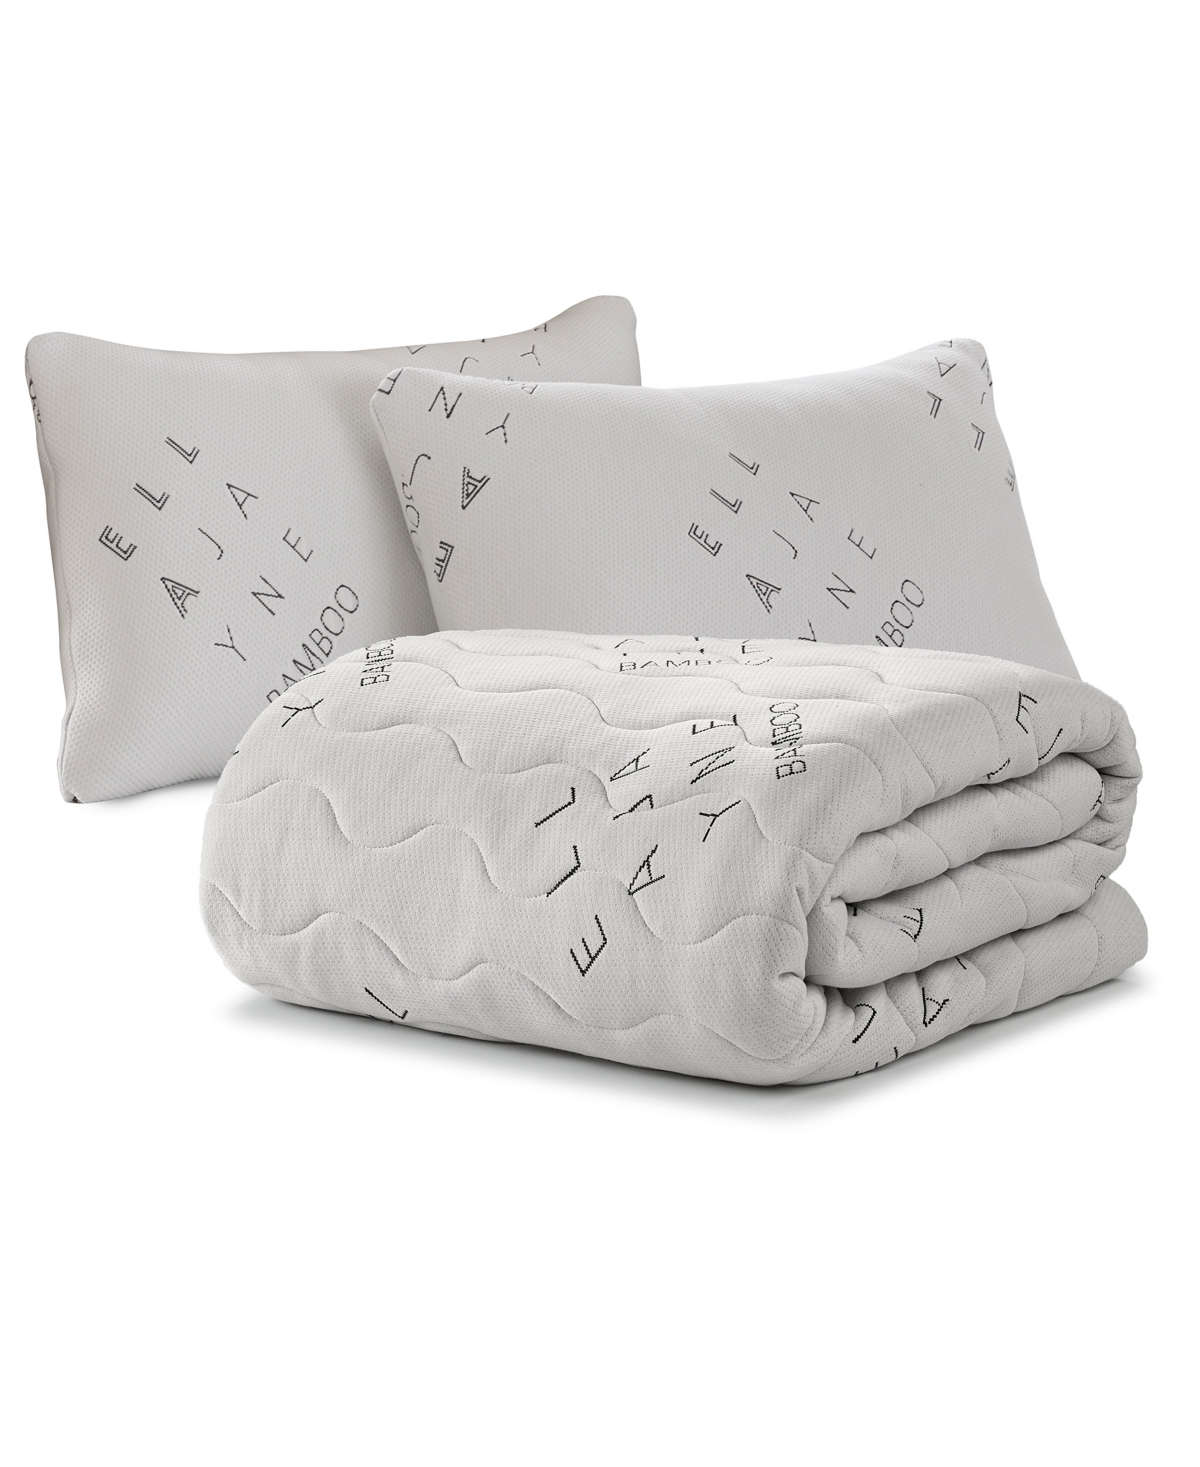 Ella Jayne Viscose From Bamboo Pillow And Topper Bedding Bundle, California King In White